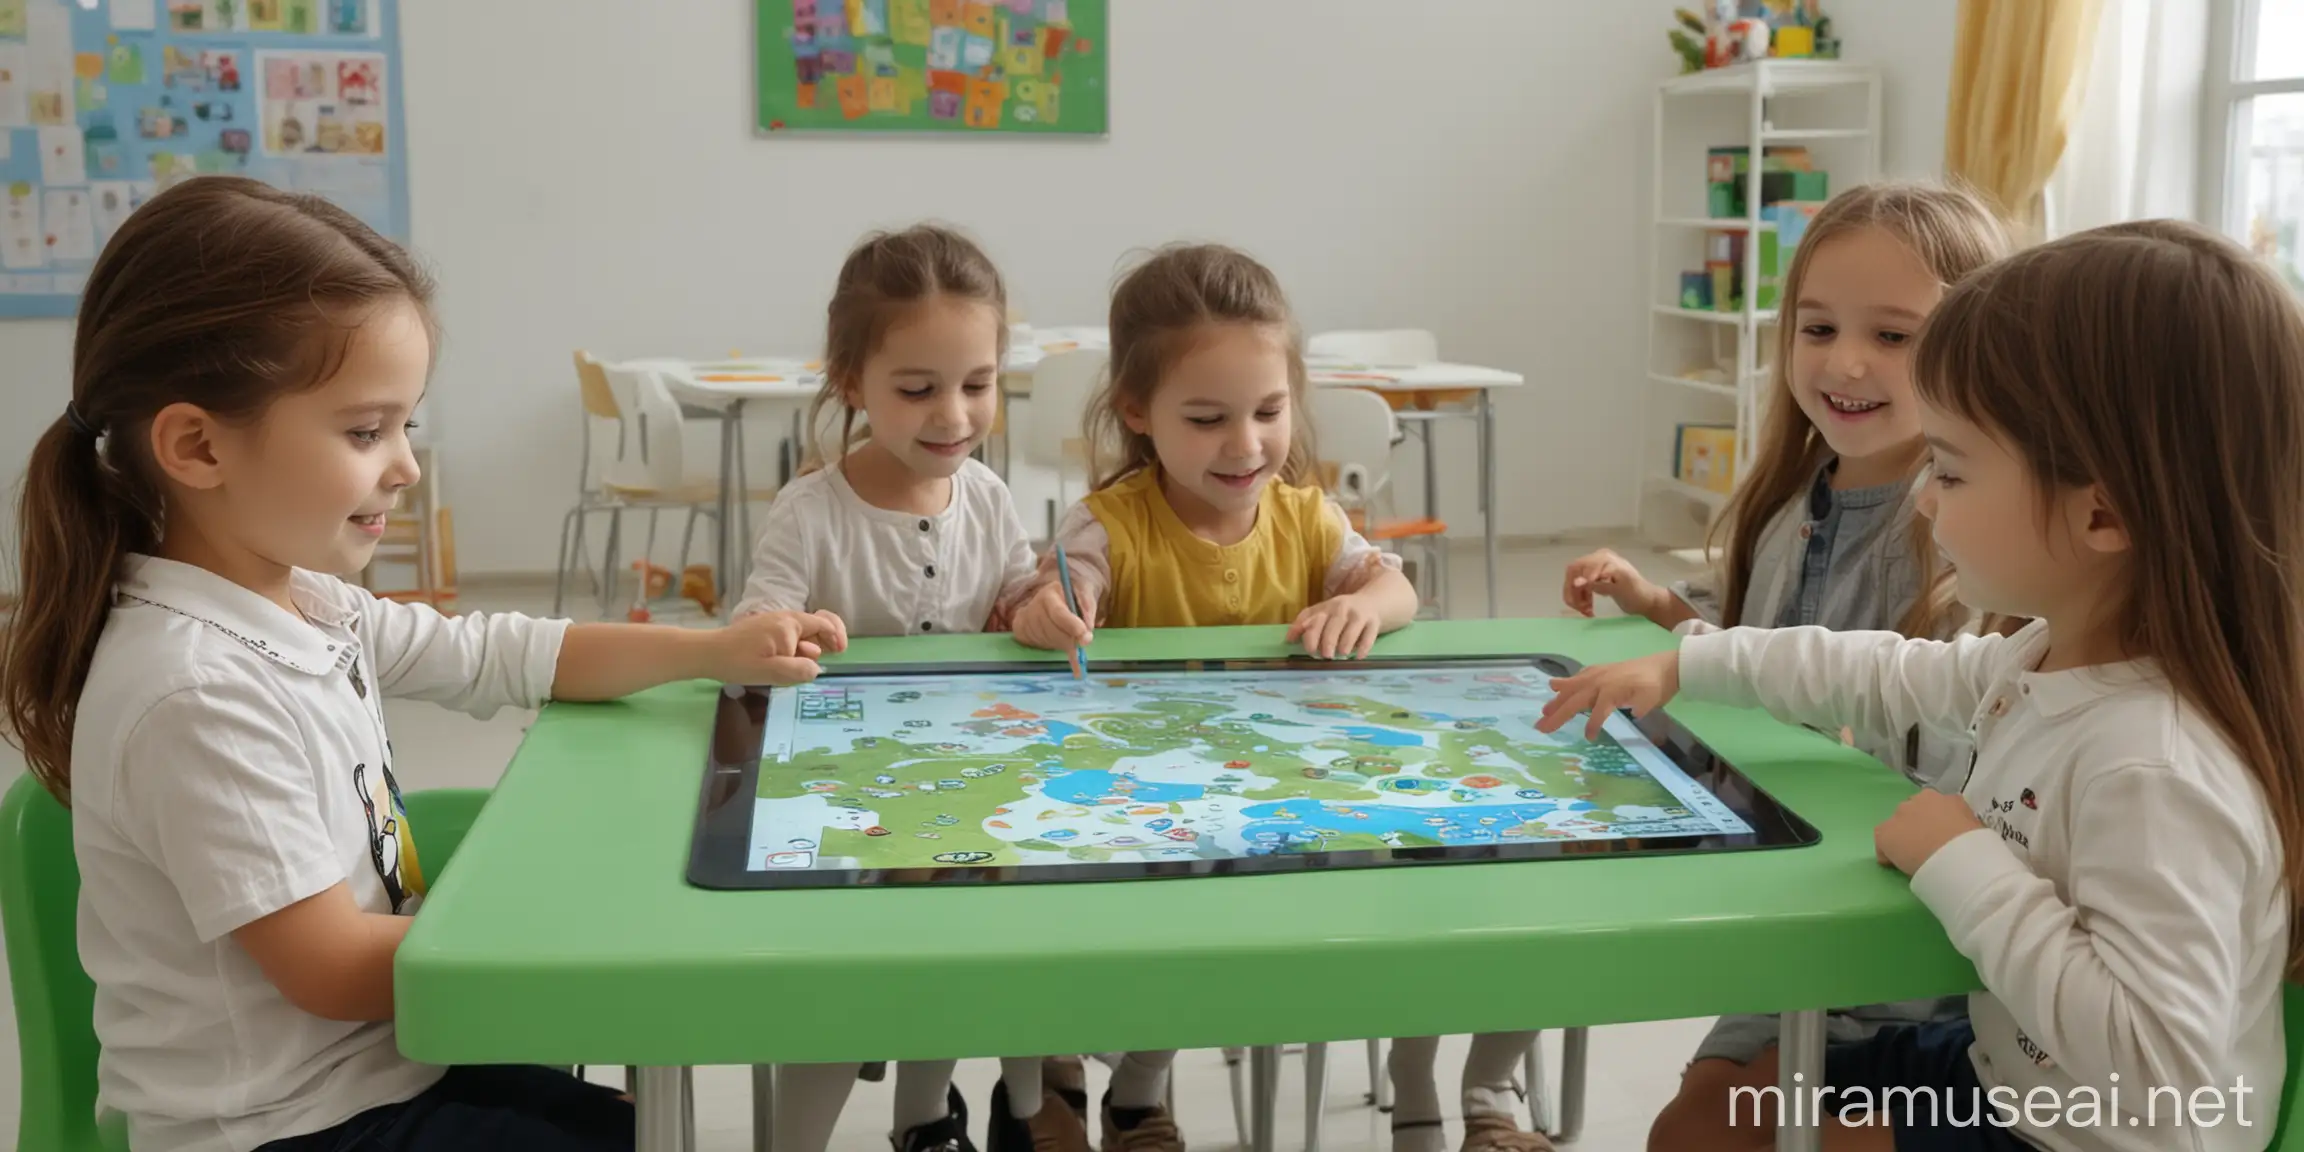 Kindergarten Children Learning at Interactive Touch Panel Table